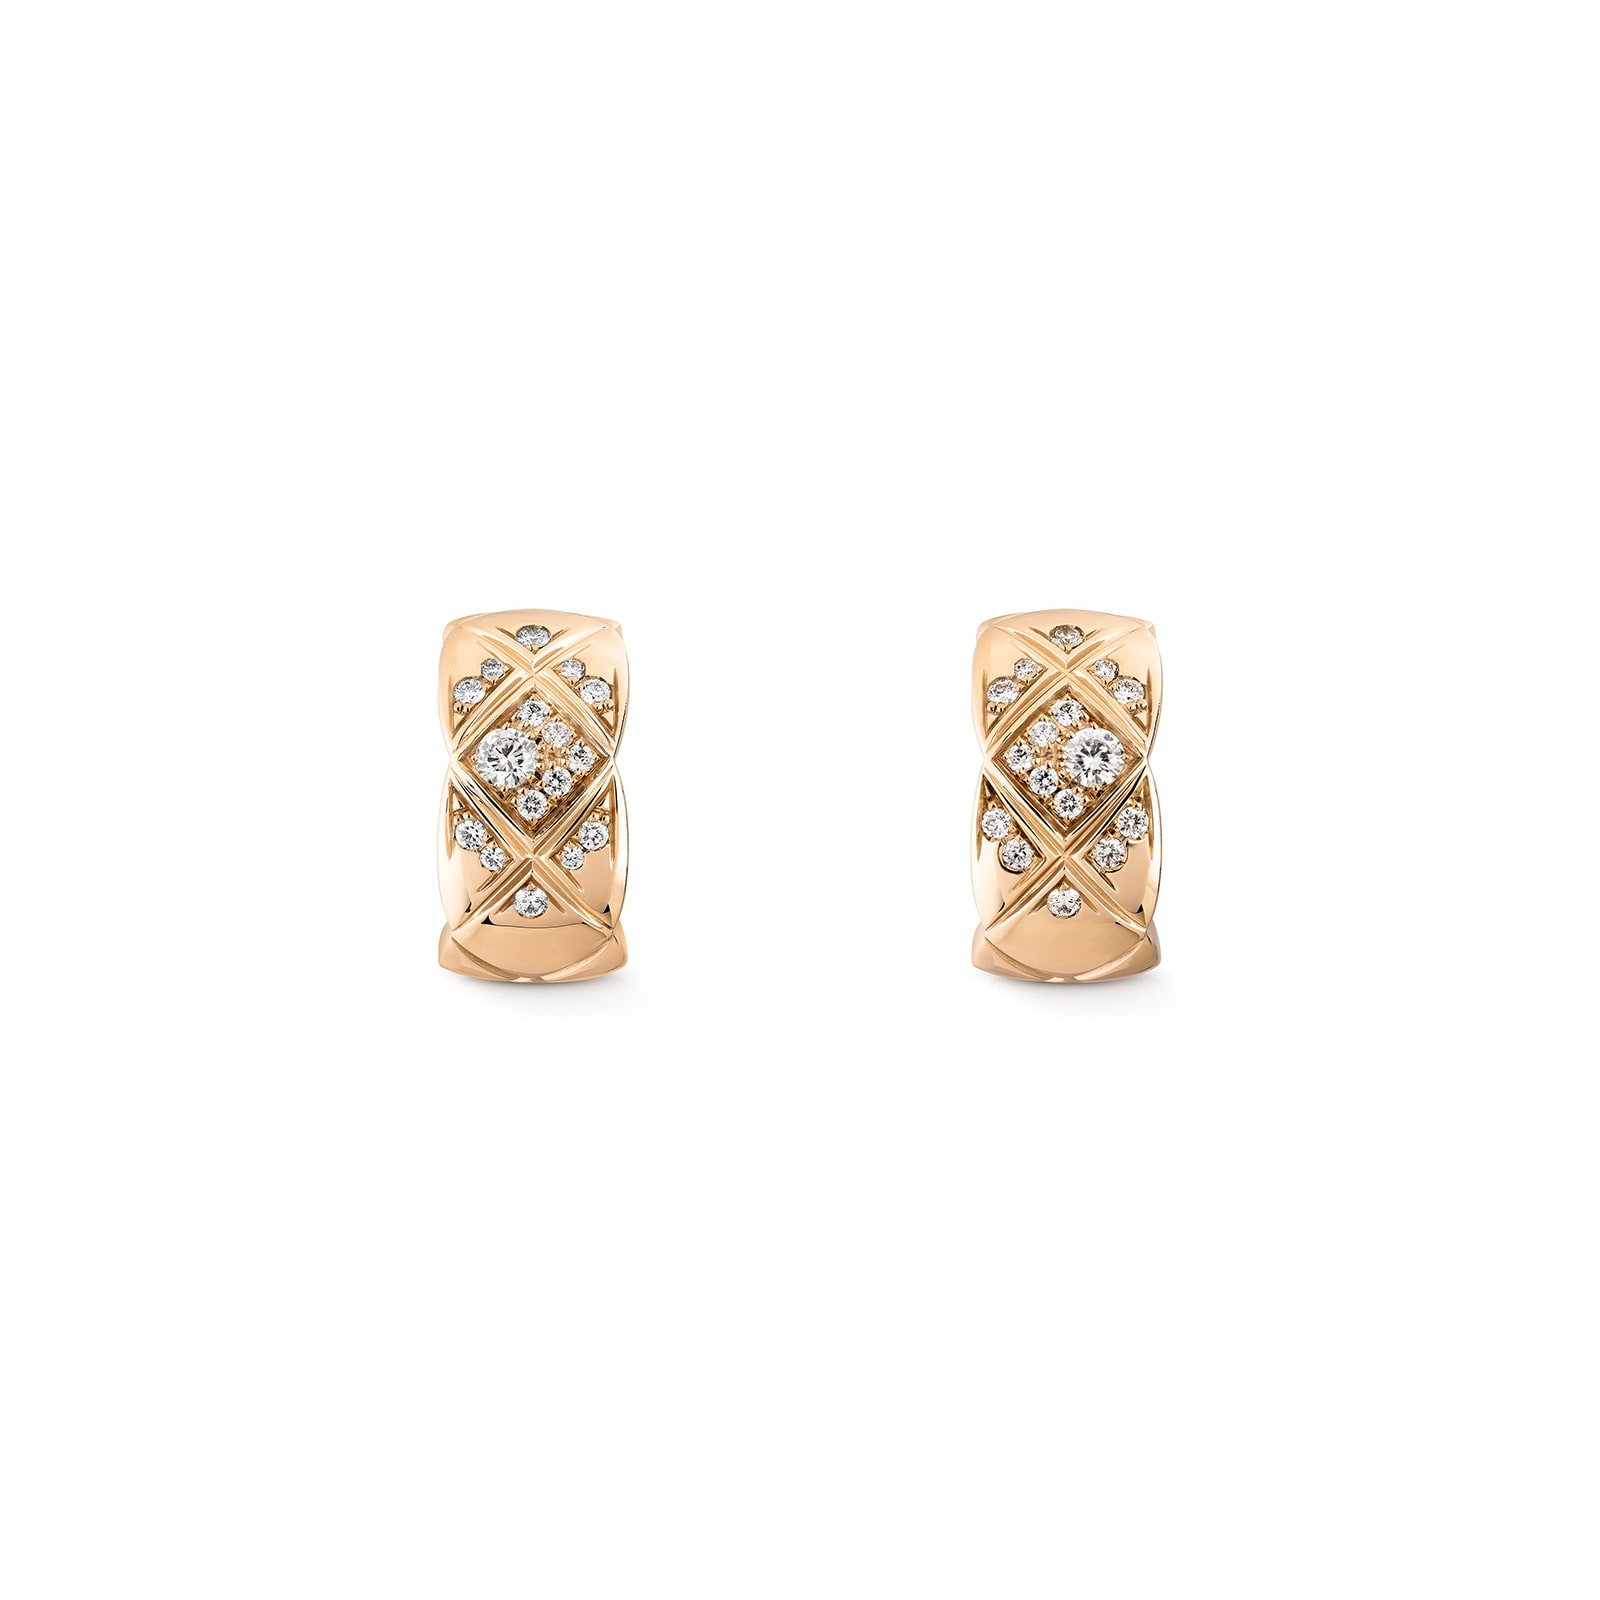 CHANEL - COCO CRUSH. New COCO CRUSH earrings in BEIGE GOLD